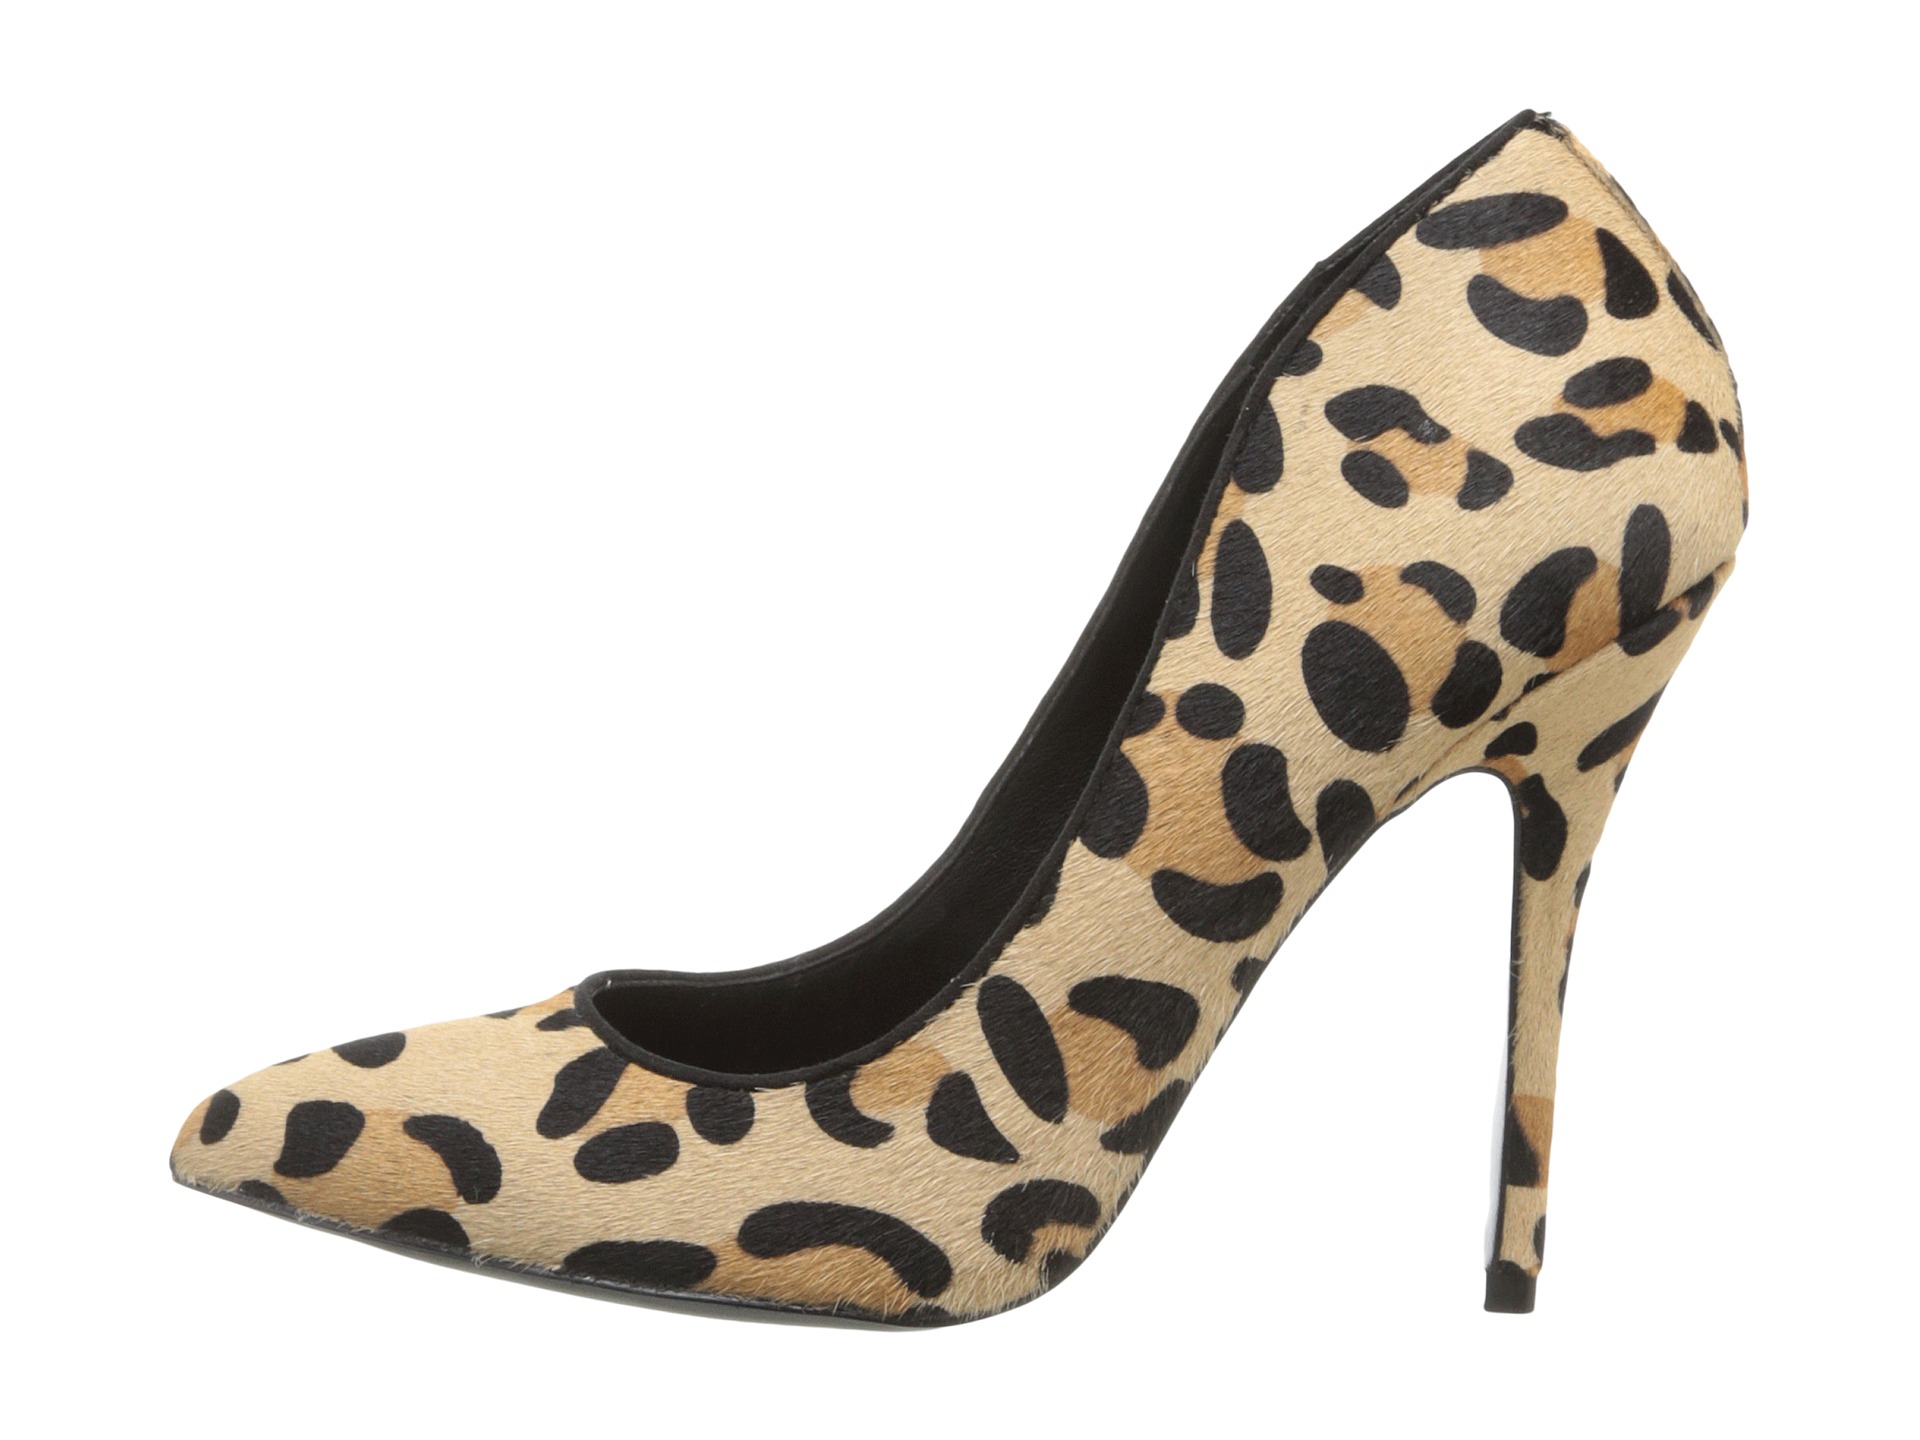 Steve Madden Galleryl Leopard | Shipped Free at Zappos